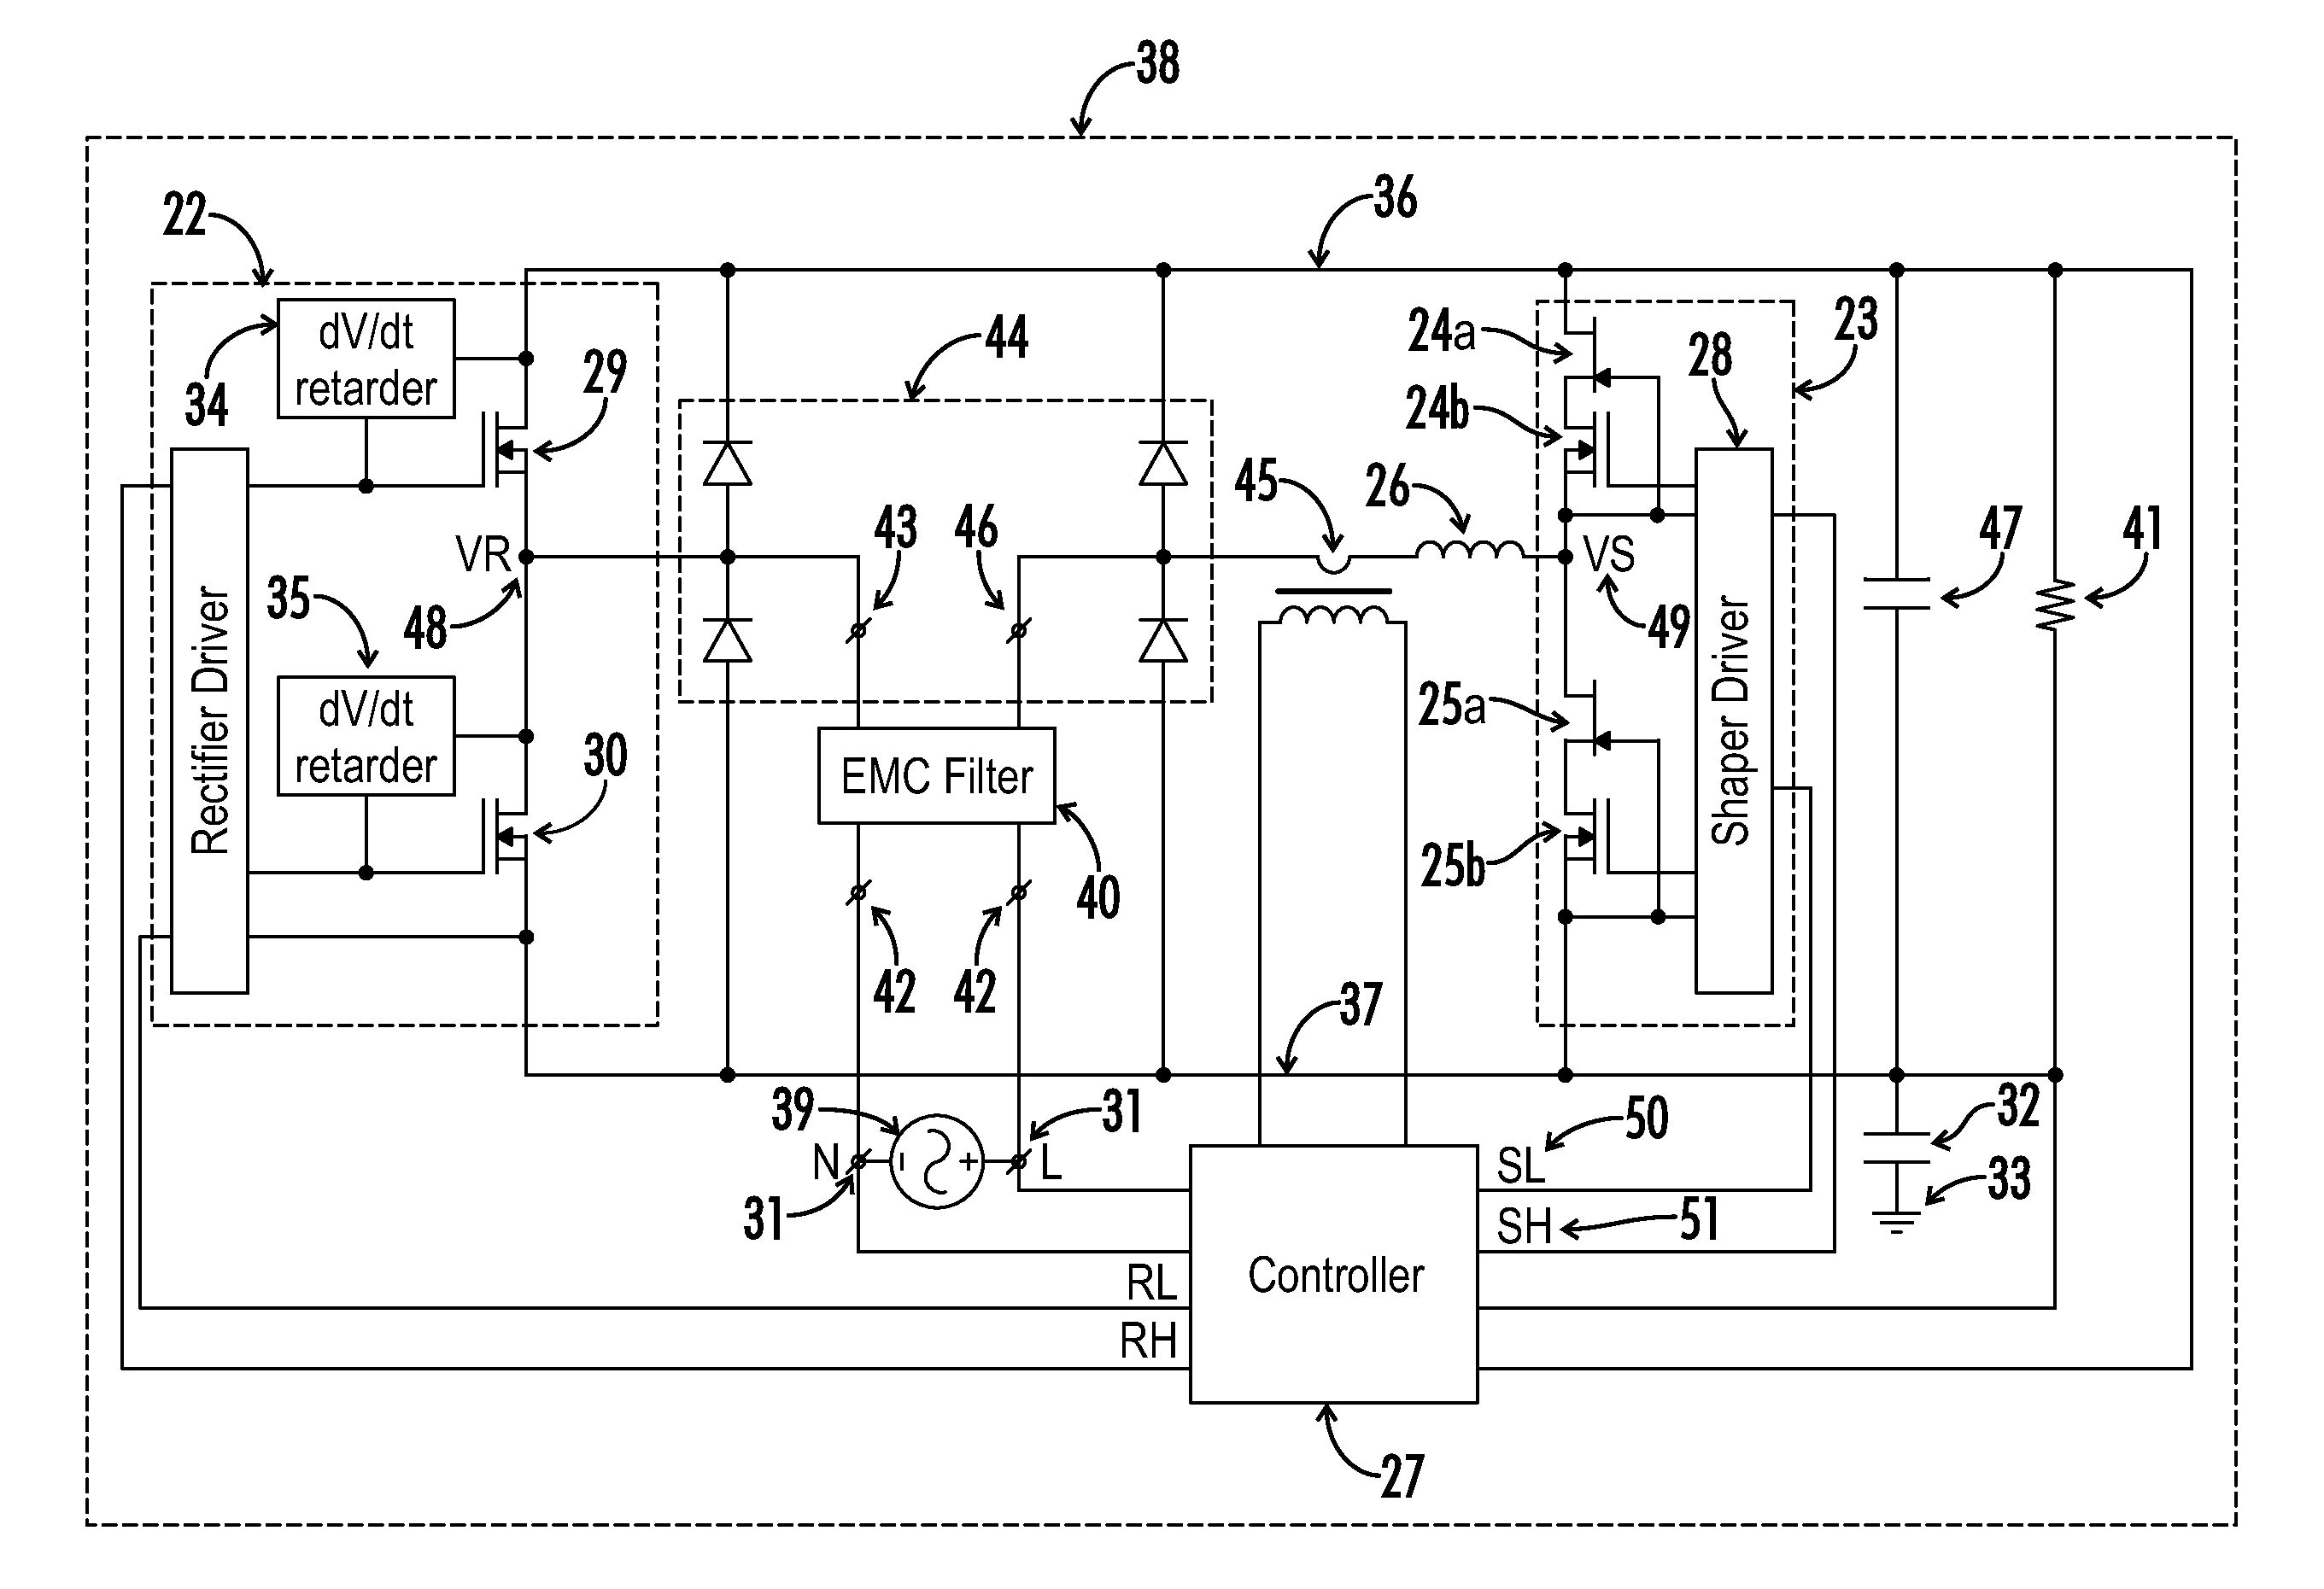 Power converter with non-symmetrical totem pole rectifier and current-shaping branch circuits